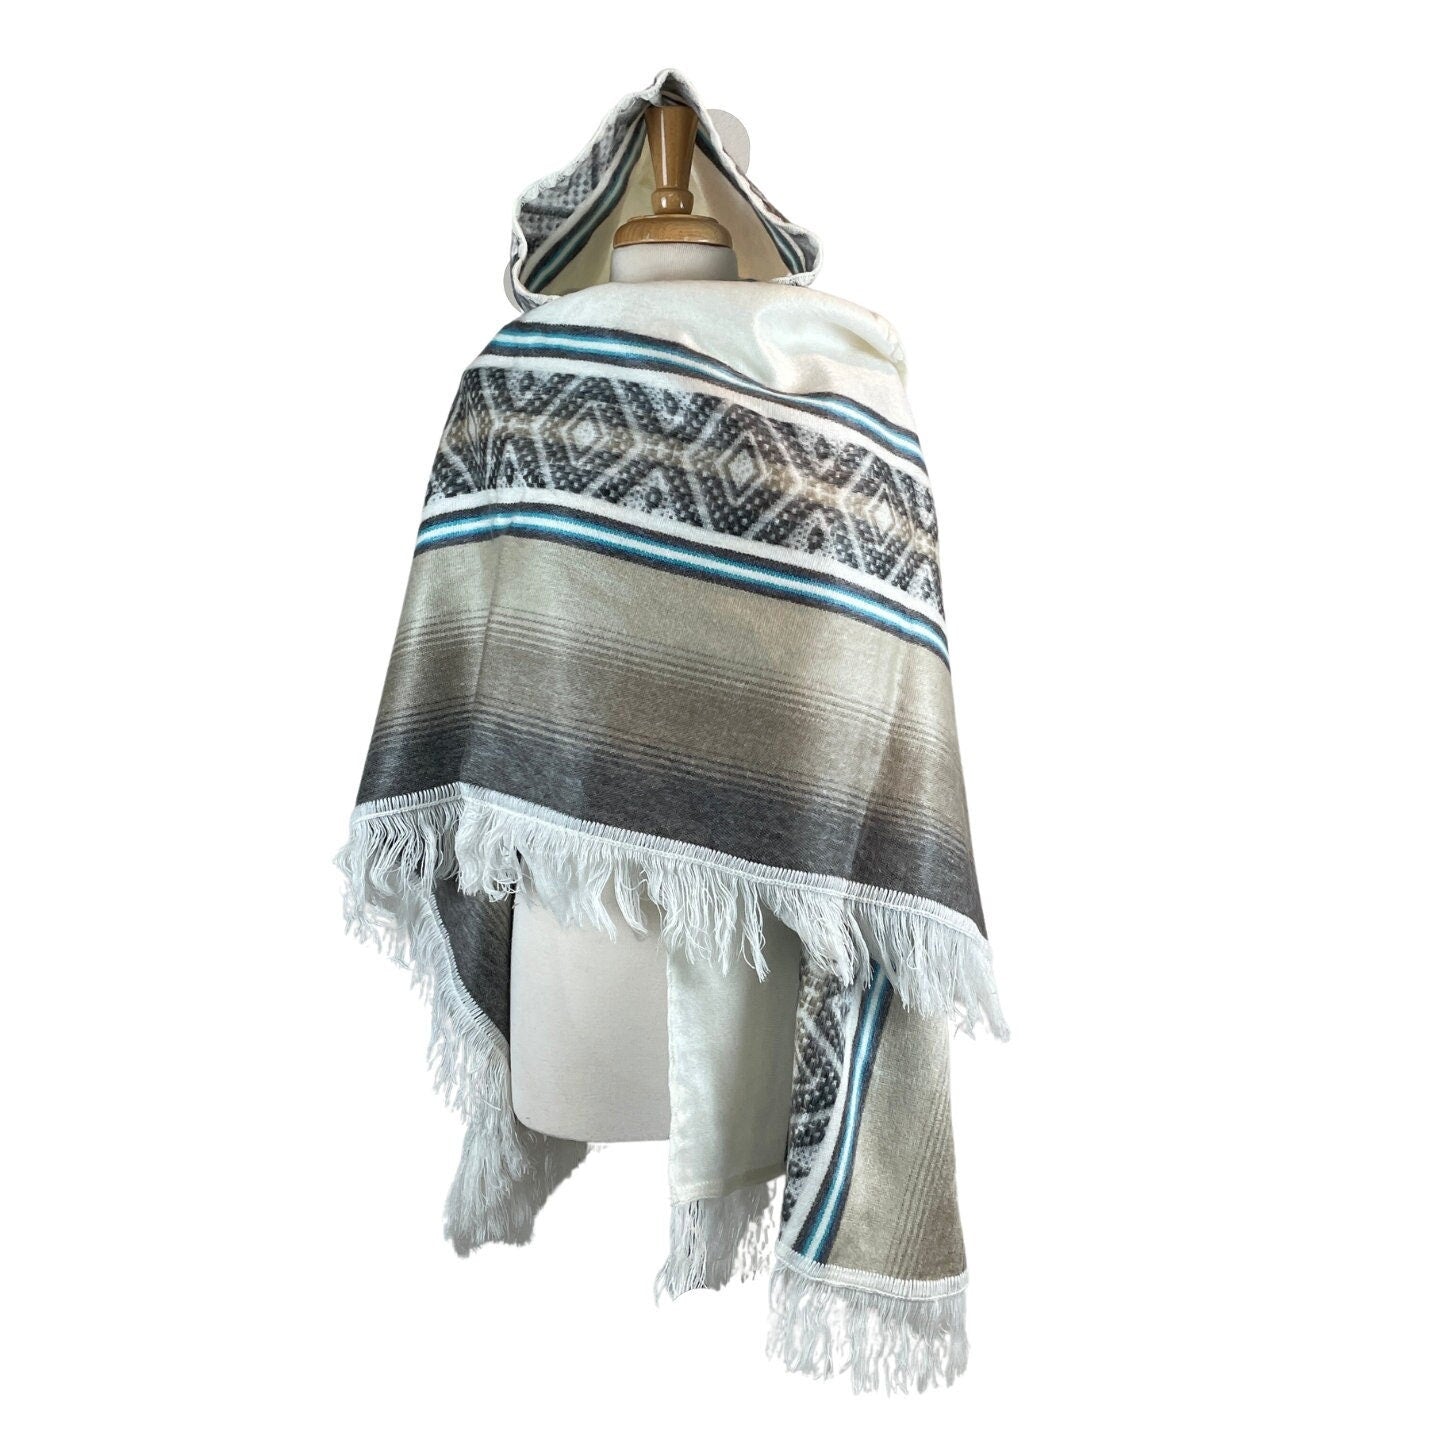 Open Unisex Hooded Poncho | White Brown Stone